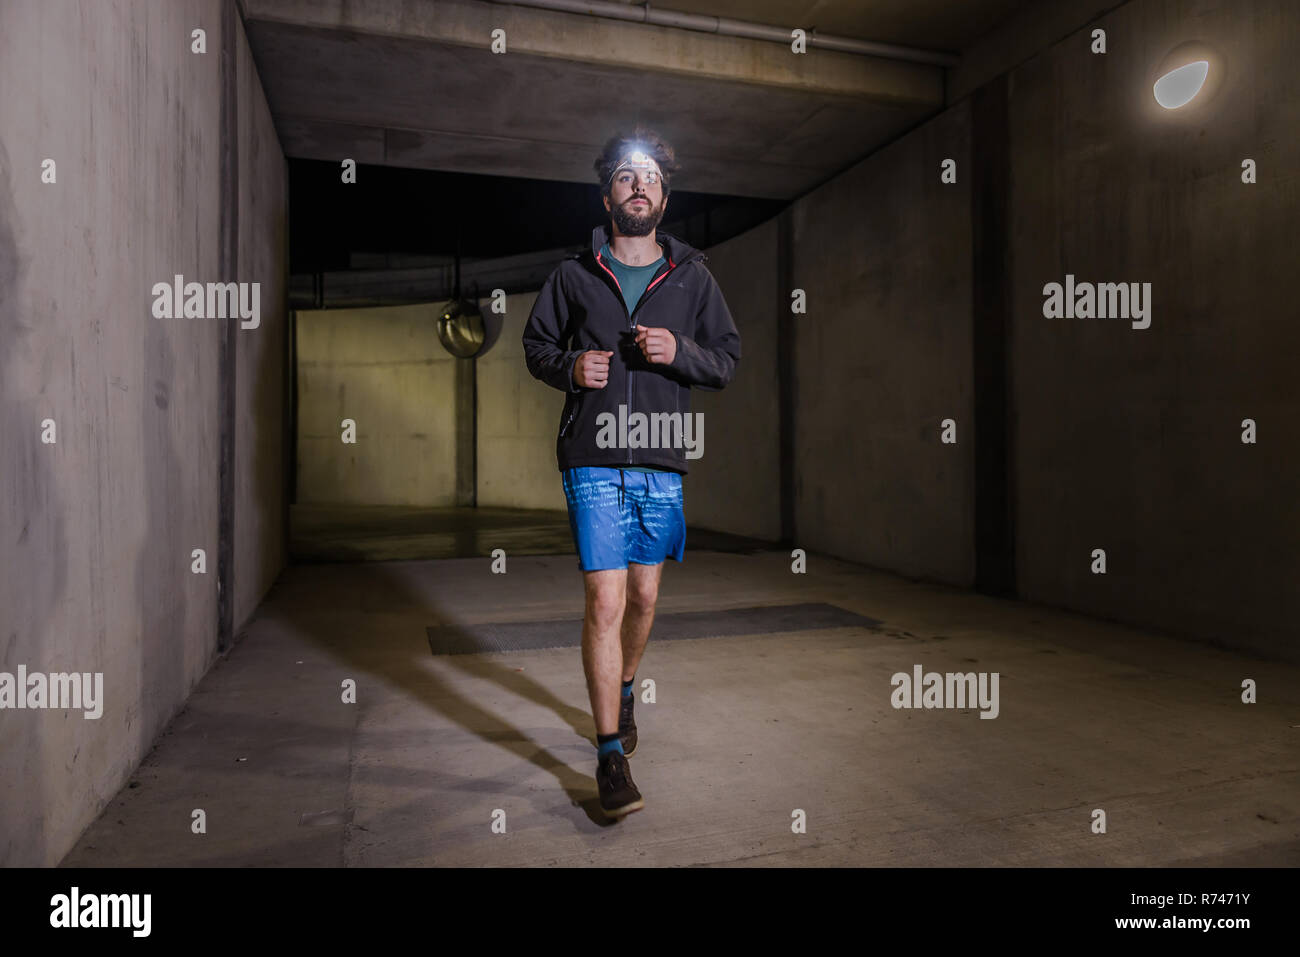 Runner with headlamp in tunnel Stock Photo